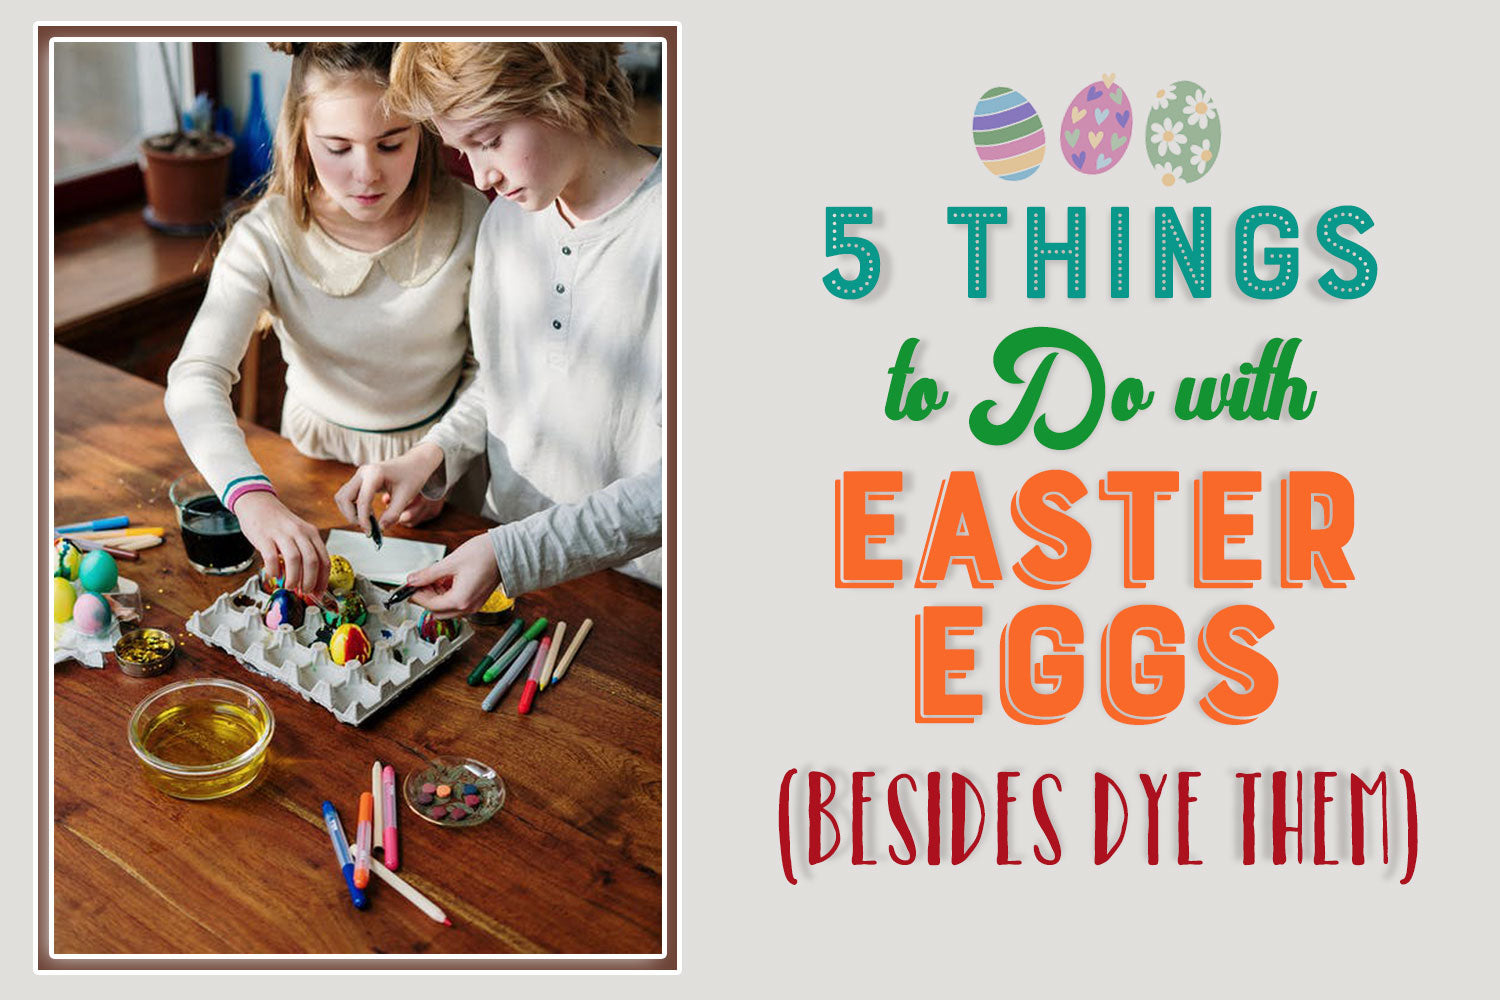 5 Things to Do with Easter Eggs (Besides Dye Them)